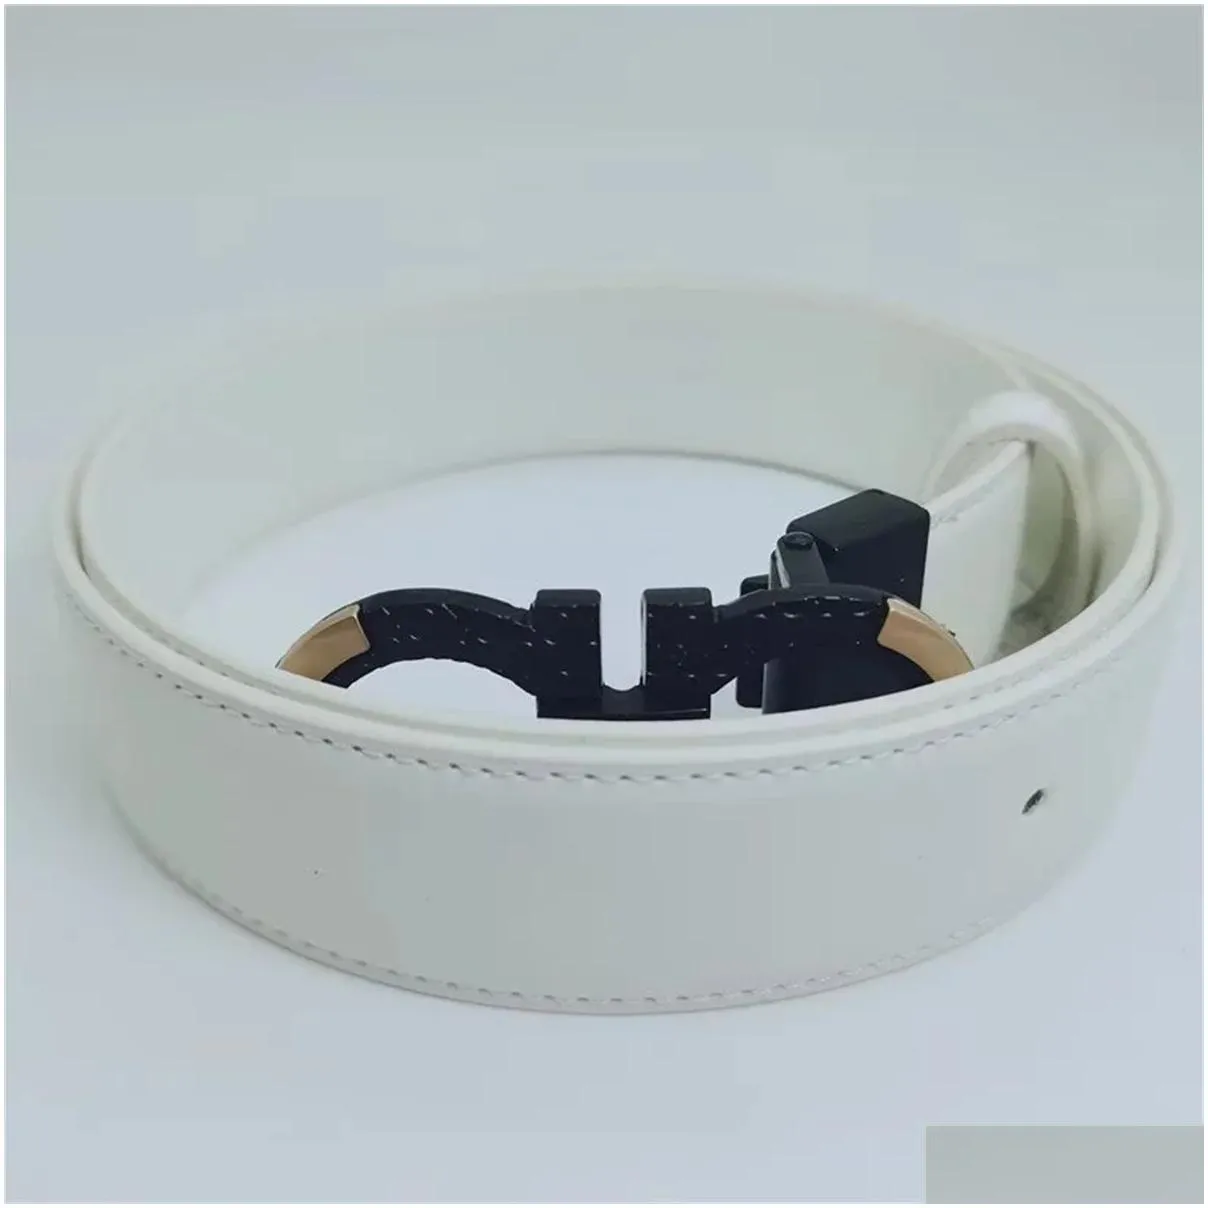 high quality mens and womens designer belt large gold buckle leather fashion belt classic strap 3.8 cm wide no box